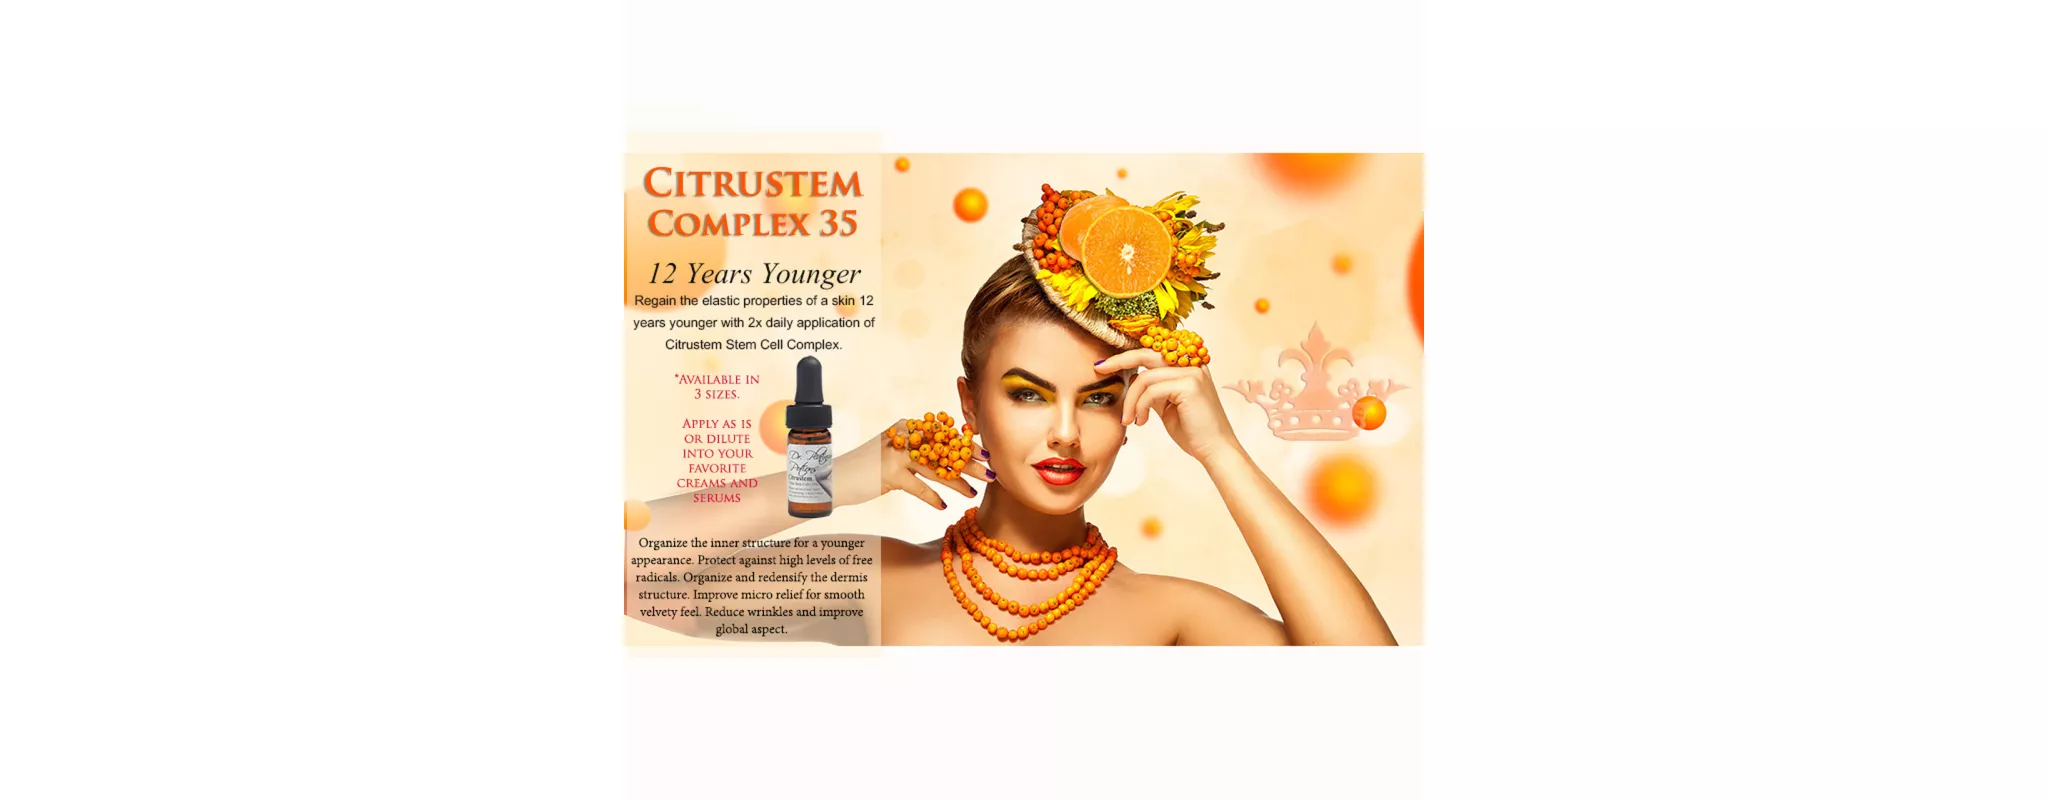 Citrustem Stem Cell Complex 35 available in two sizes.